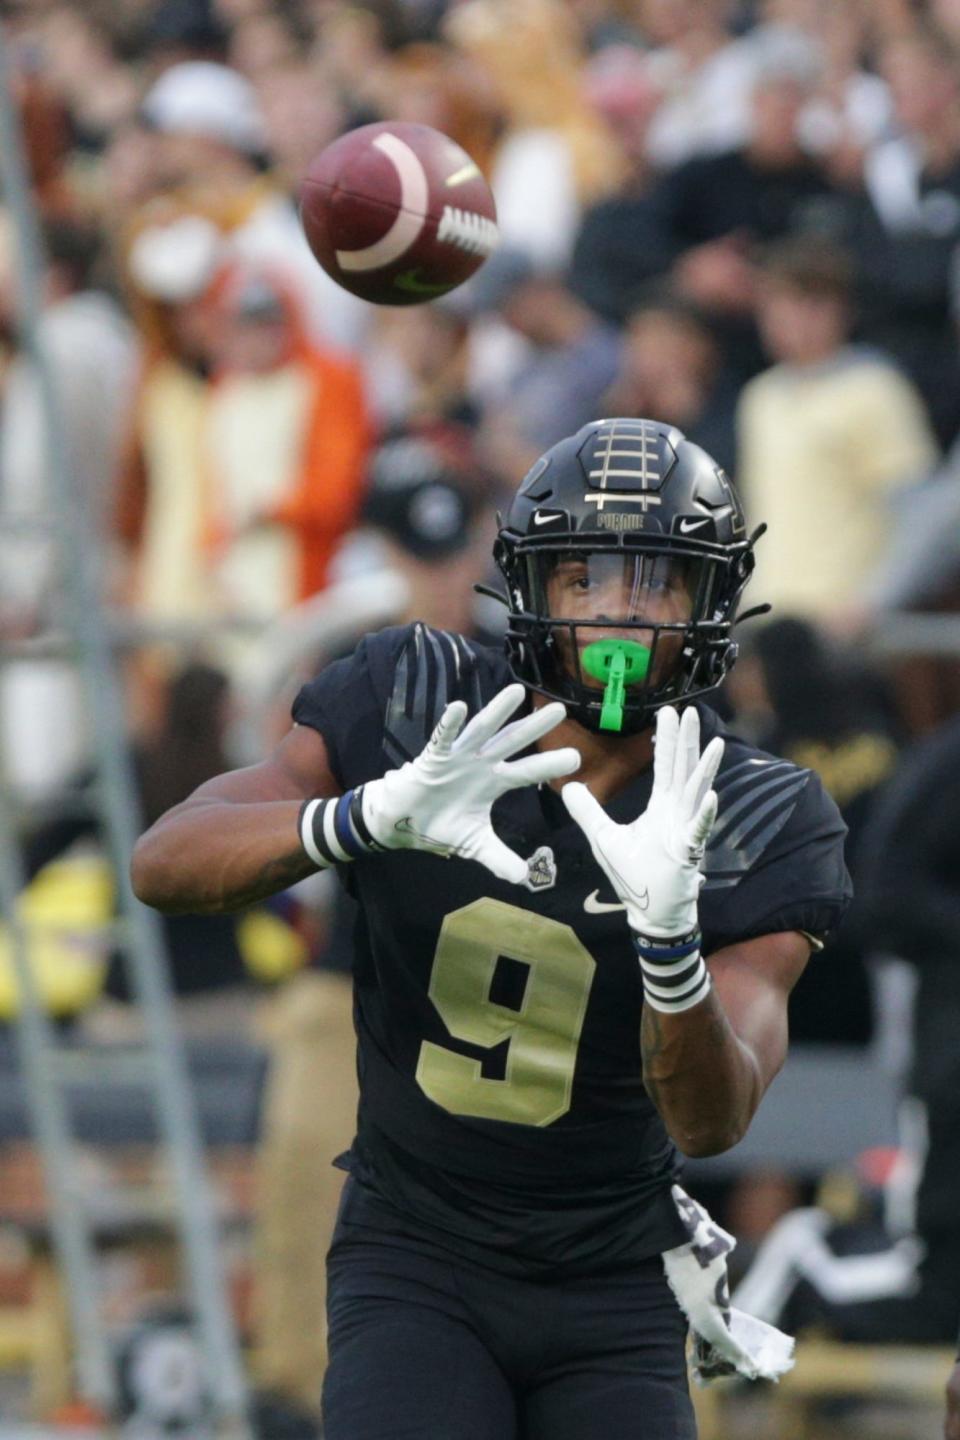 Purdue wide receiver Mershawn Rice (9) warms up prior to a NCAA football game between the Purdue Boilermakers and the Oregon State Beavers, Saturday, Sept. 4, 2021 in West Lafayette.